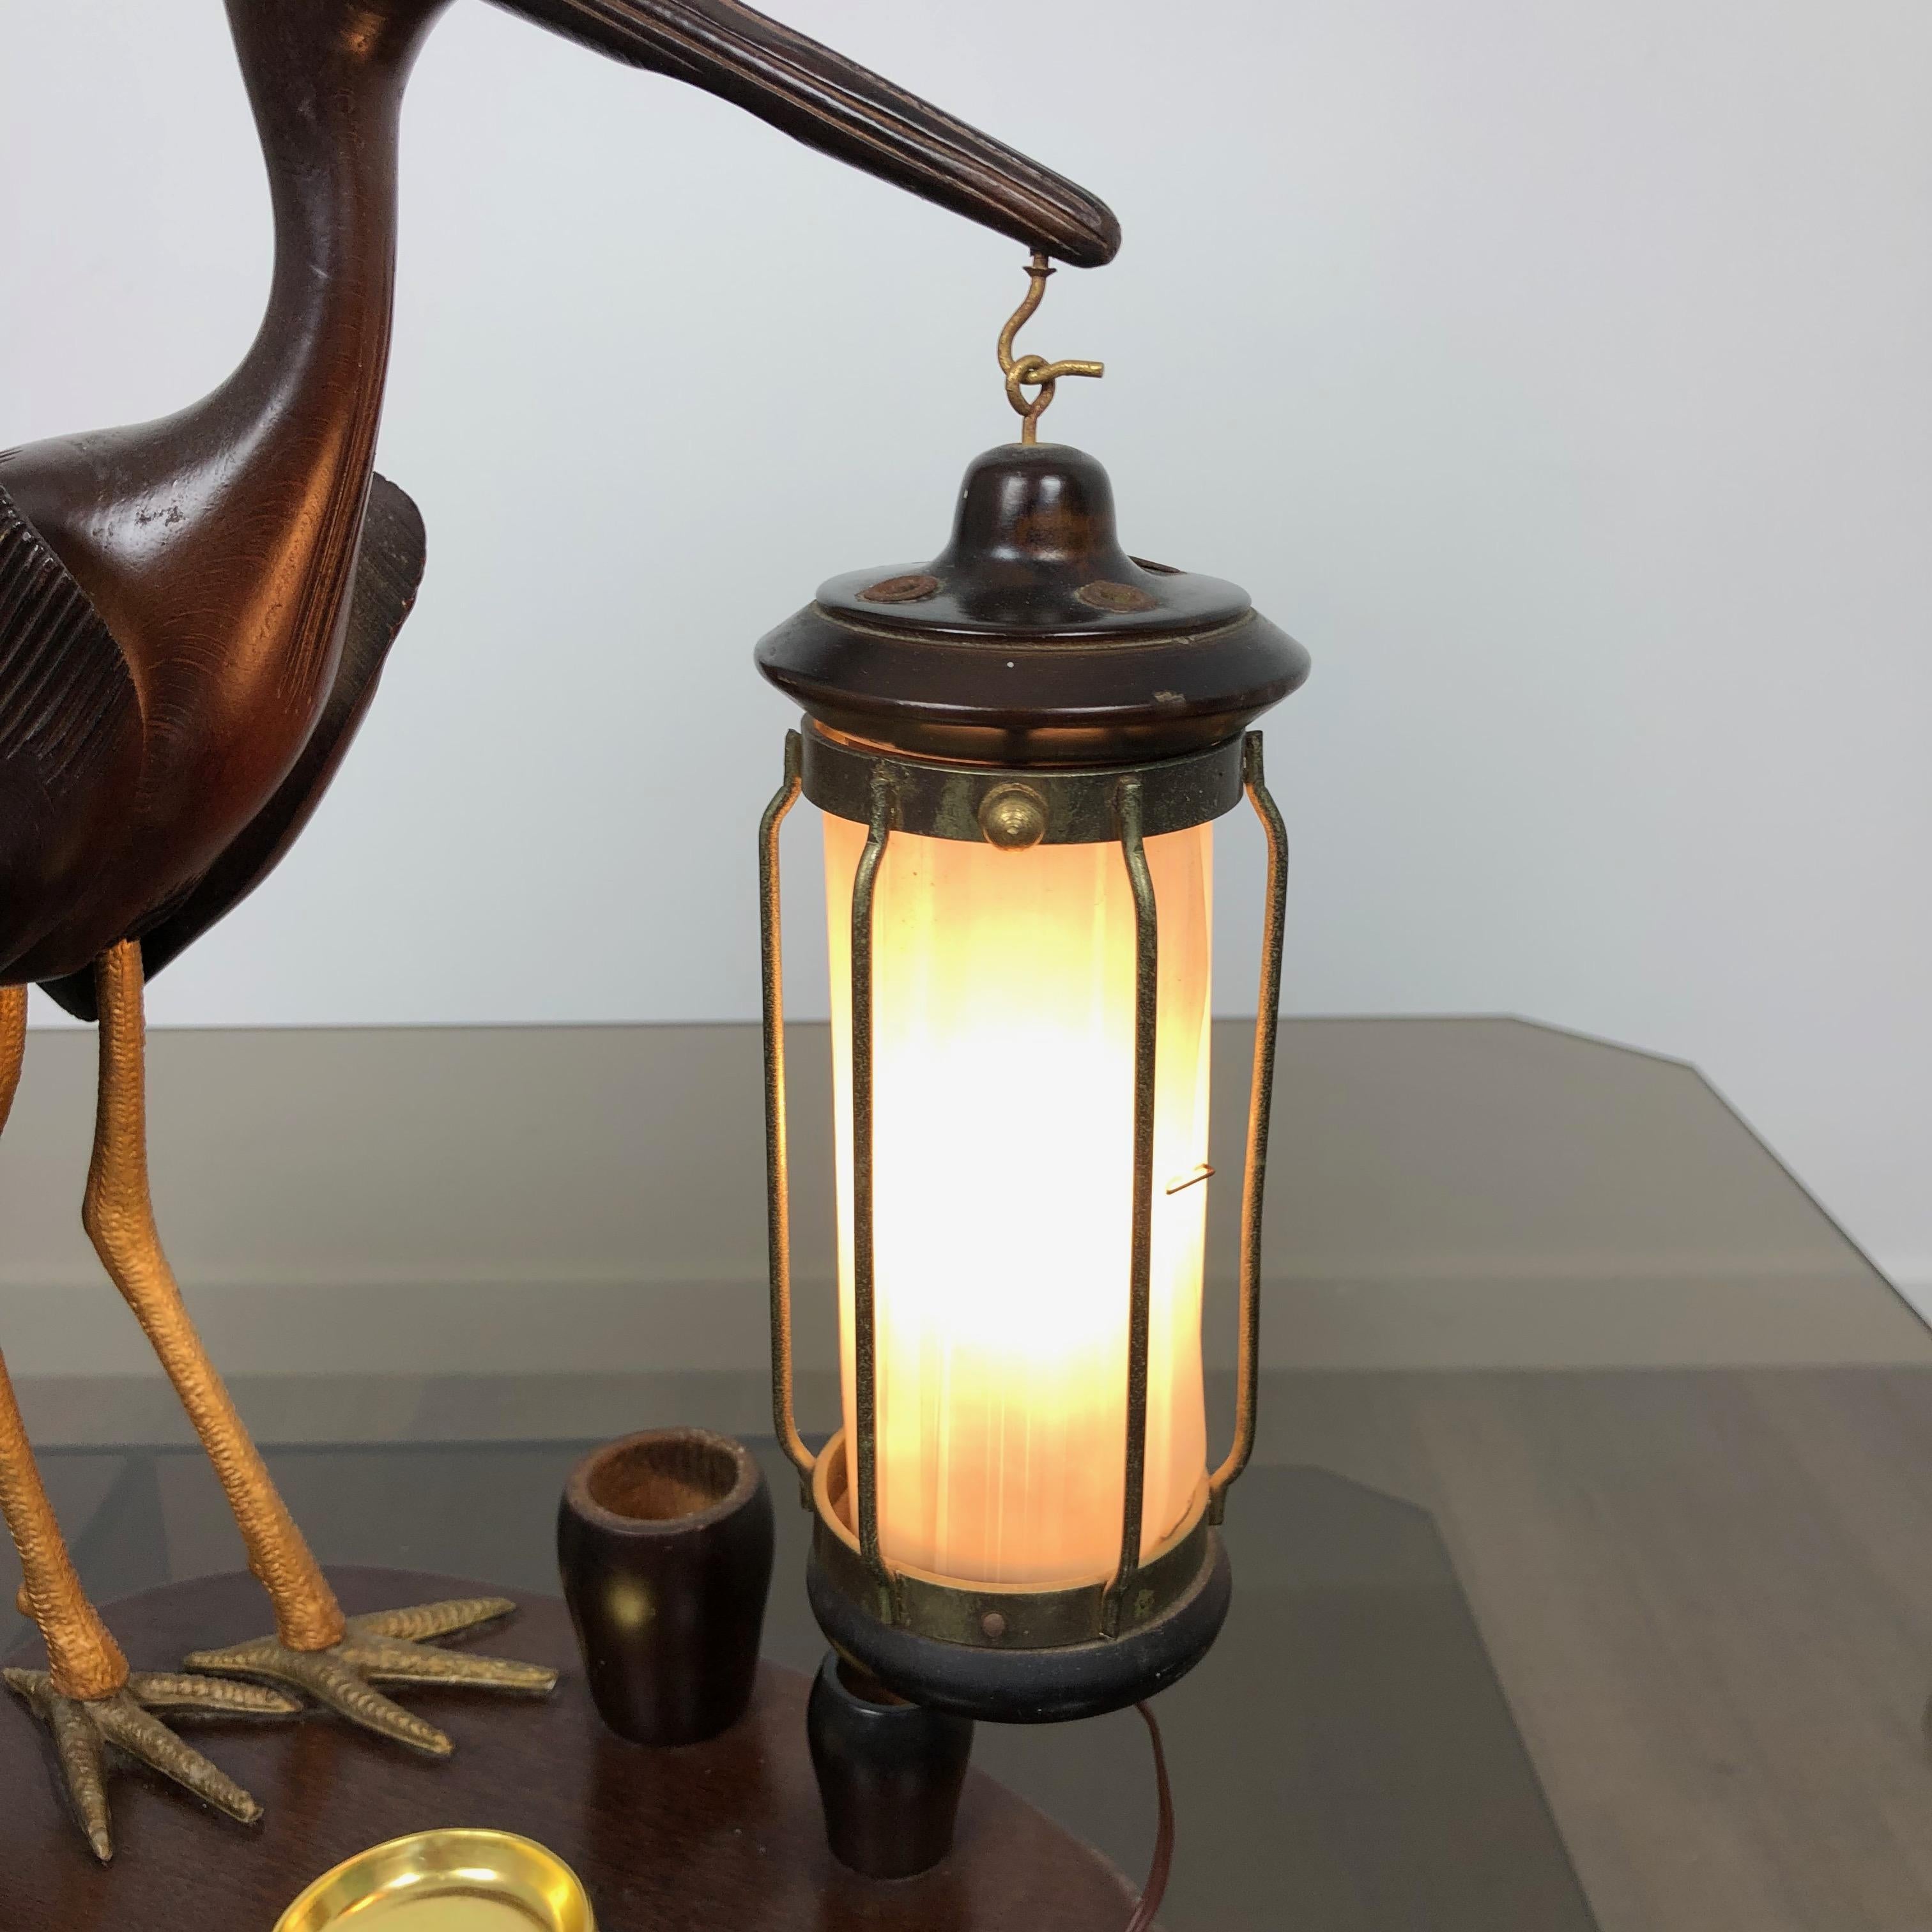 1940s Art Deco Heron Table Lamp Ashtray Cigarette Service Italy Hand Carved Wood 5